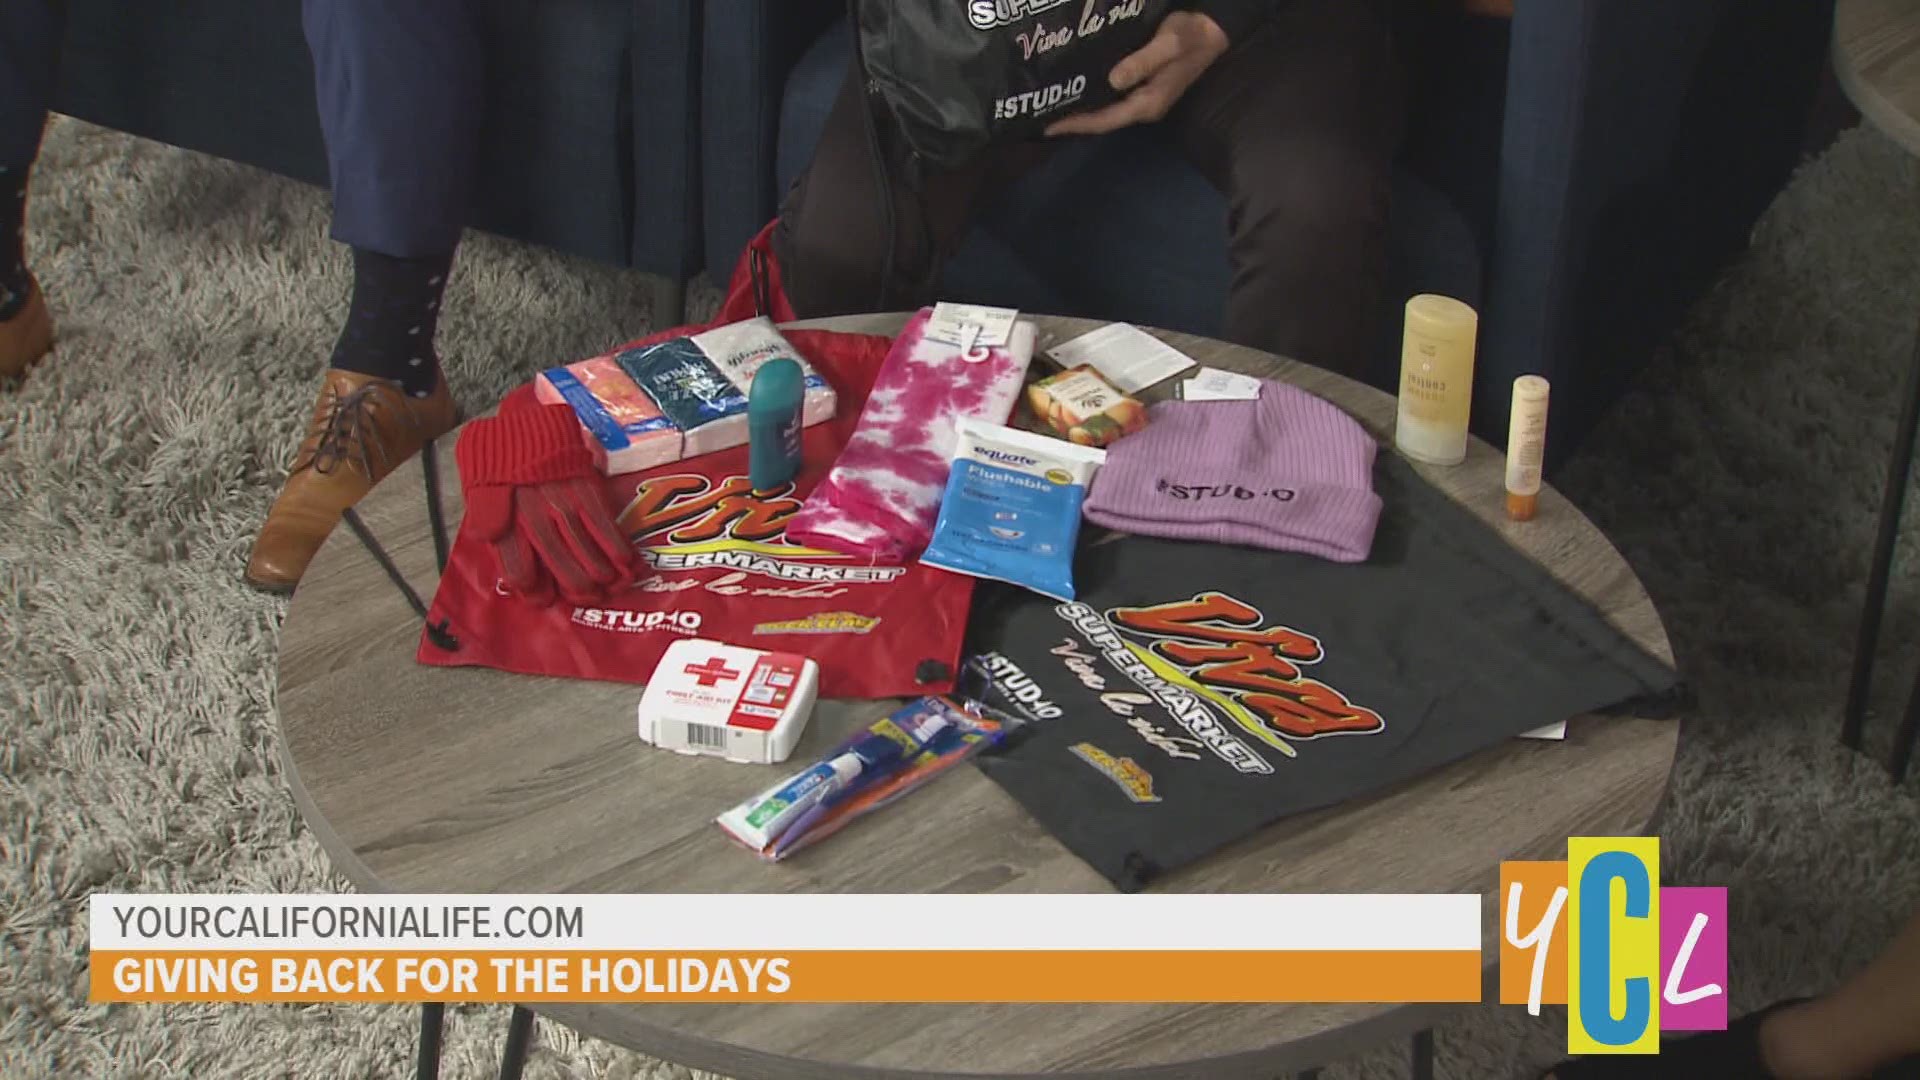 Find out how you can help those in need this holiday season!